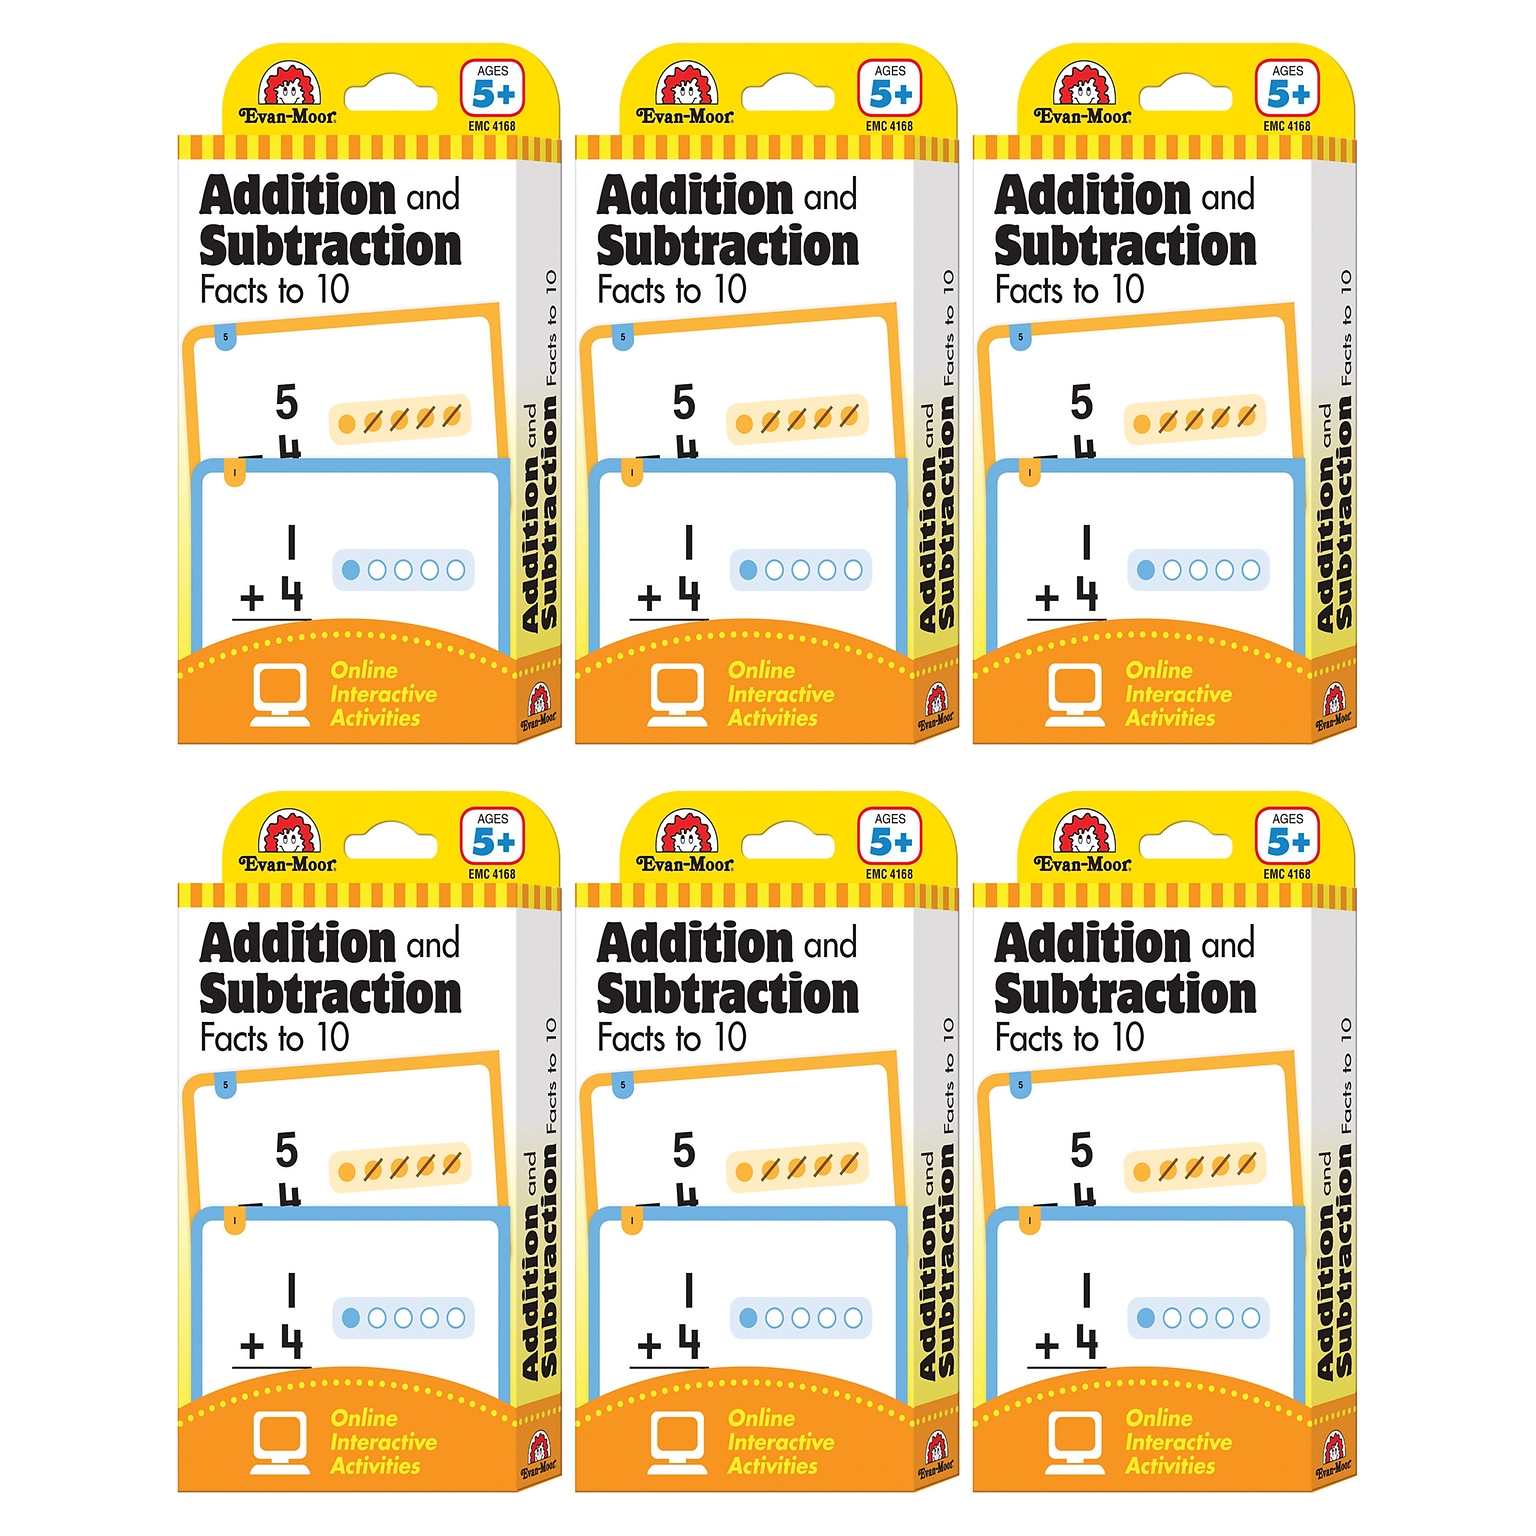 Evan-Moor Learning Line: Addition and Subtraction Facts to 10, Grade 1+ (Age 5+) - 56 Flashcards Per Pack, 6 Packs (EMC4168-6)